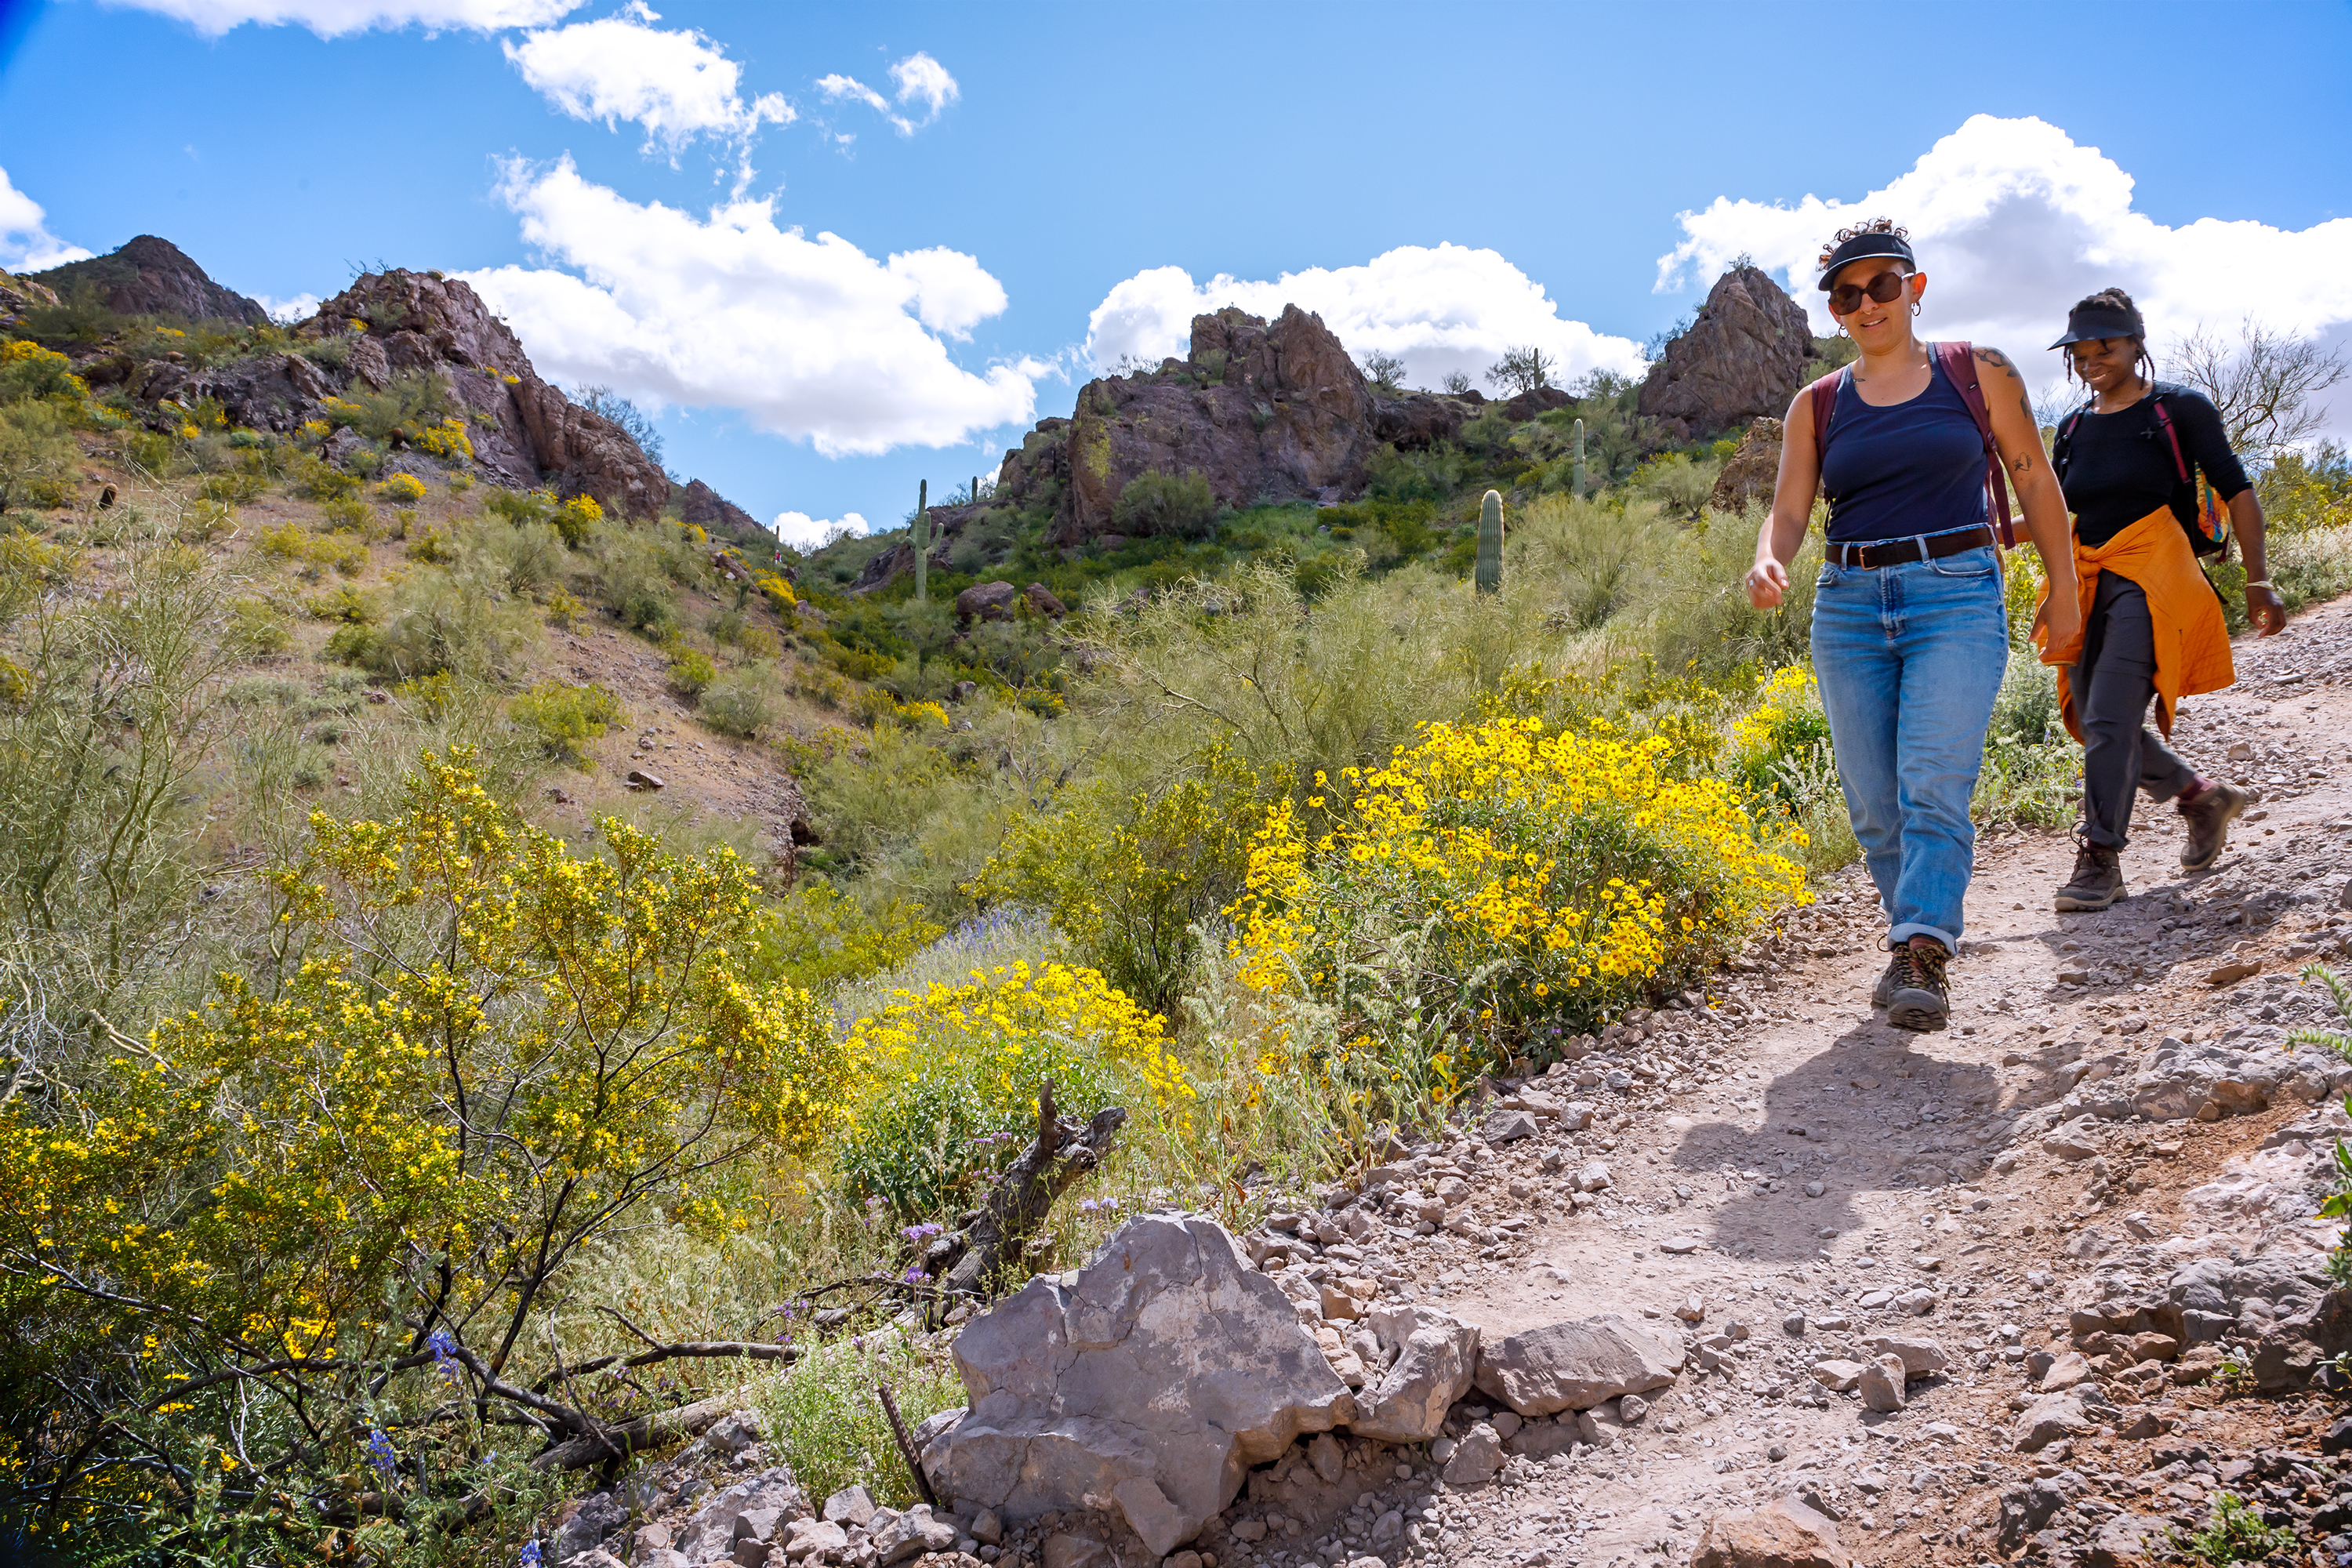 Two women walk on a desert trail that is bordered by yellow brittlebush flowers.